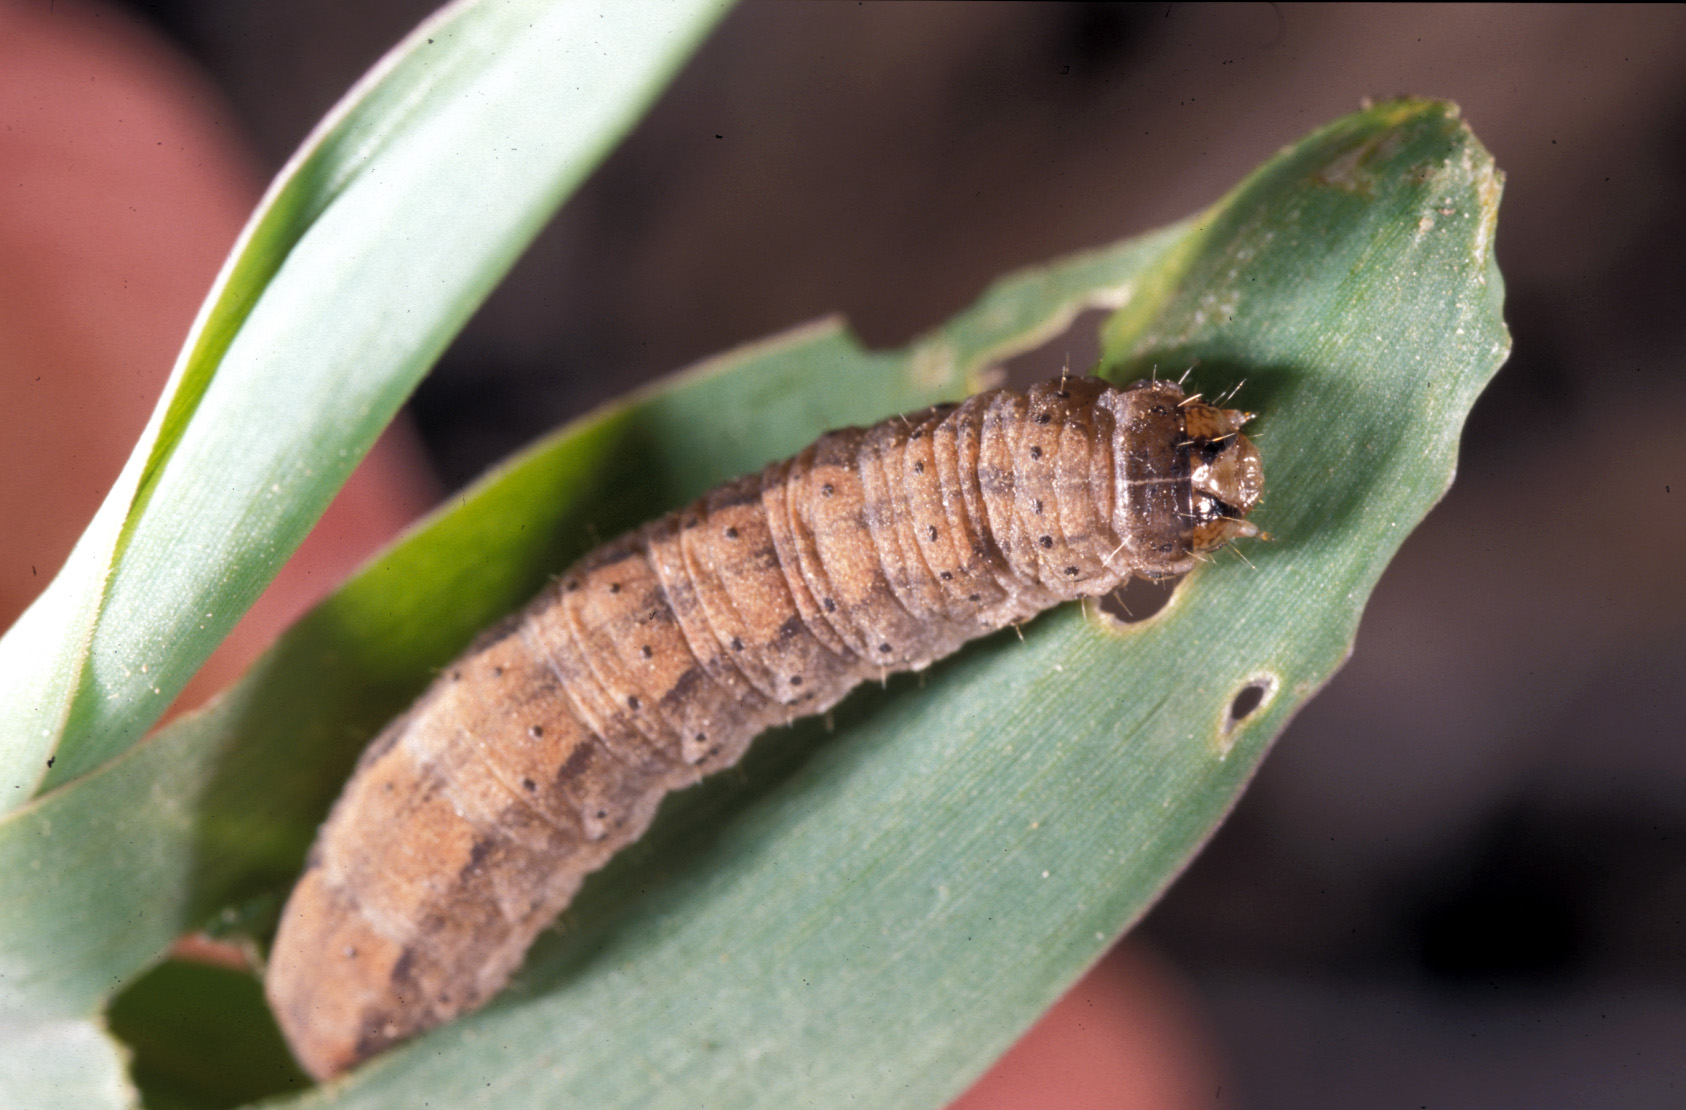 other cutworms